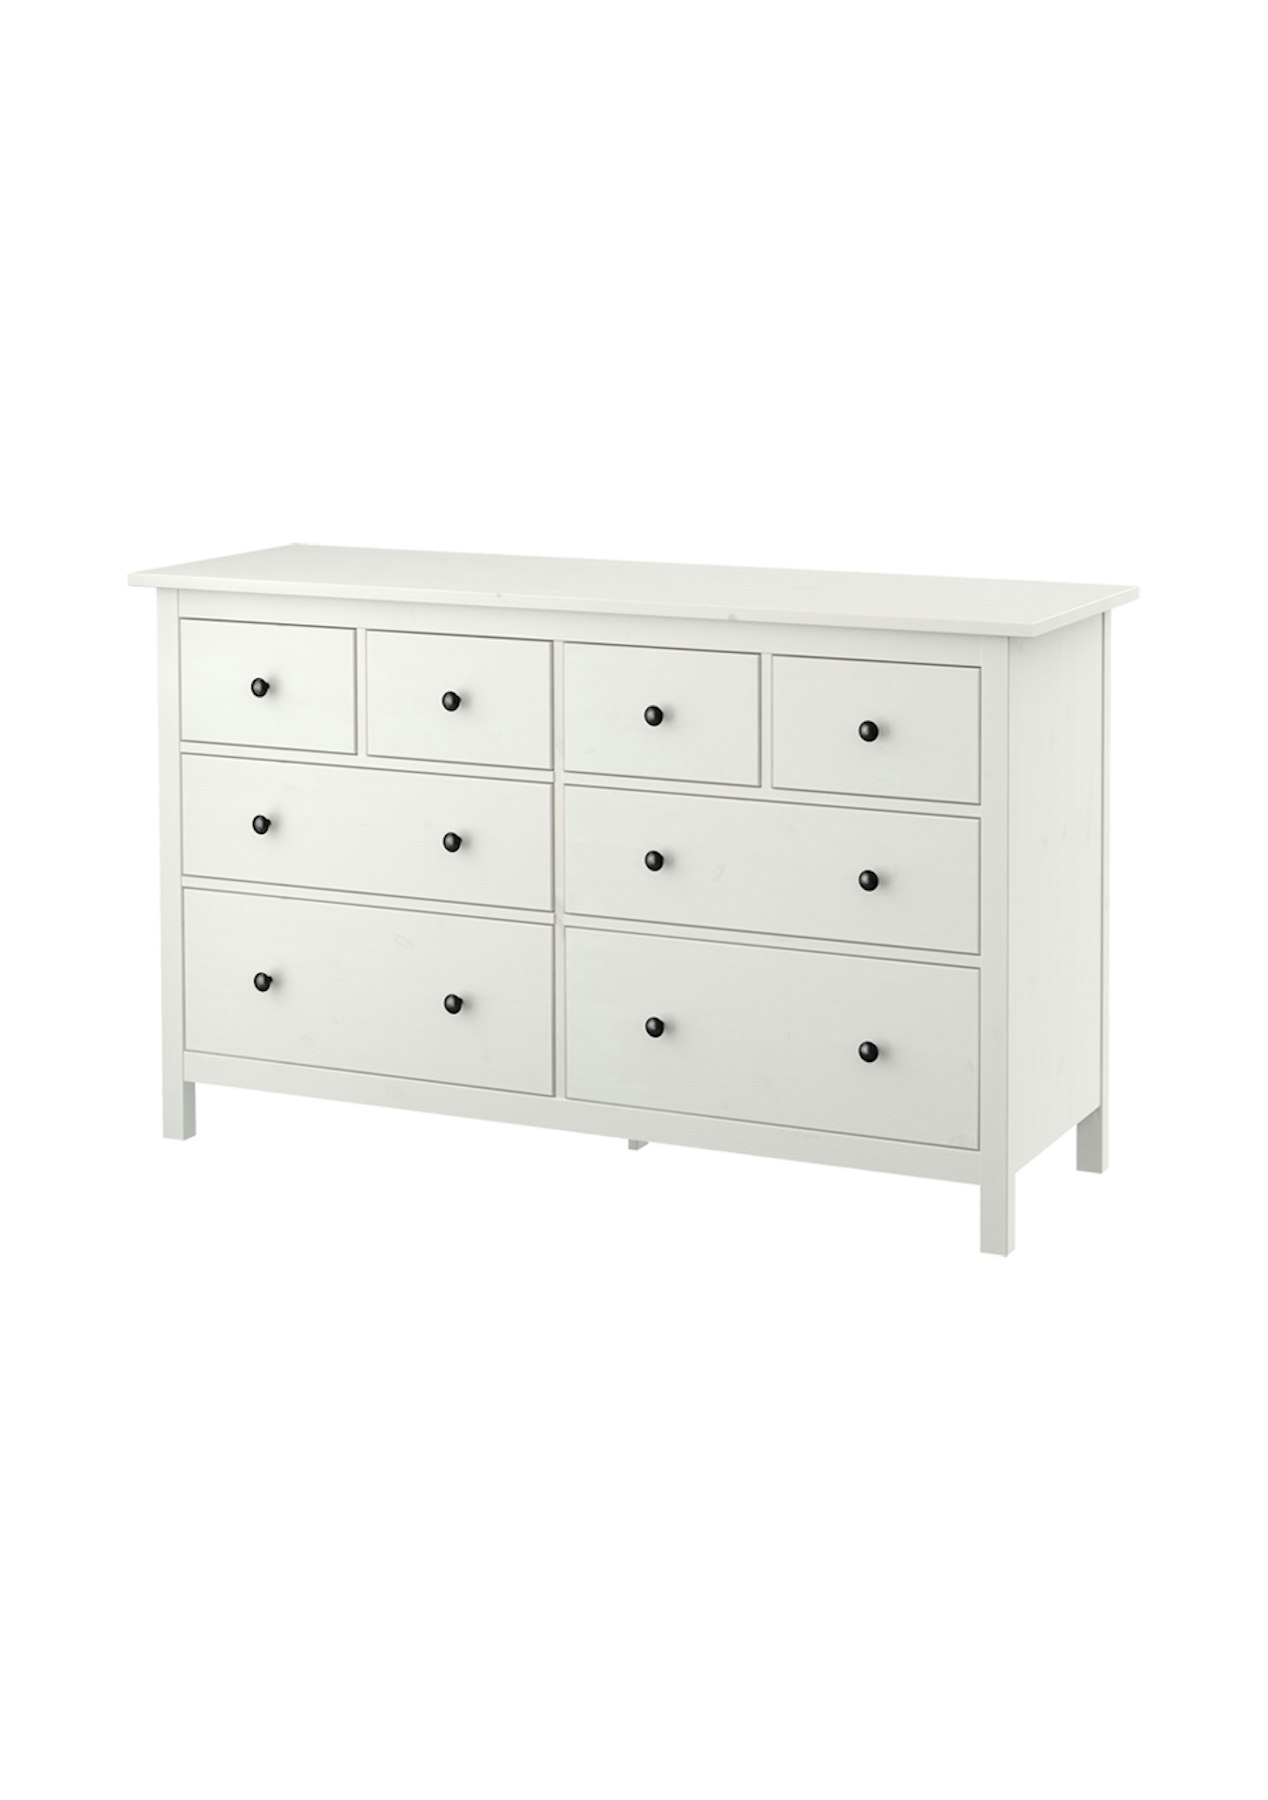 Ikea Hemnes 8 Drawers Chest Ikea Homewares More Onceit